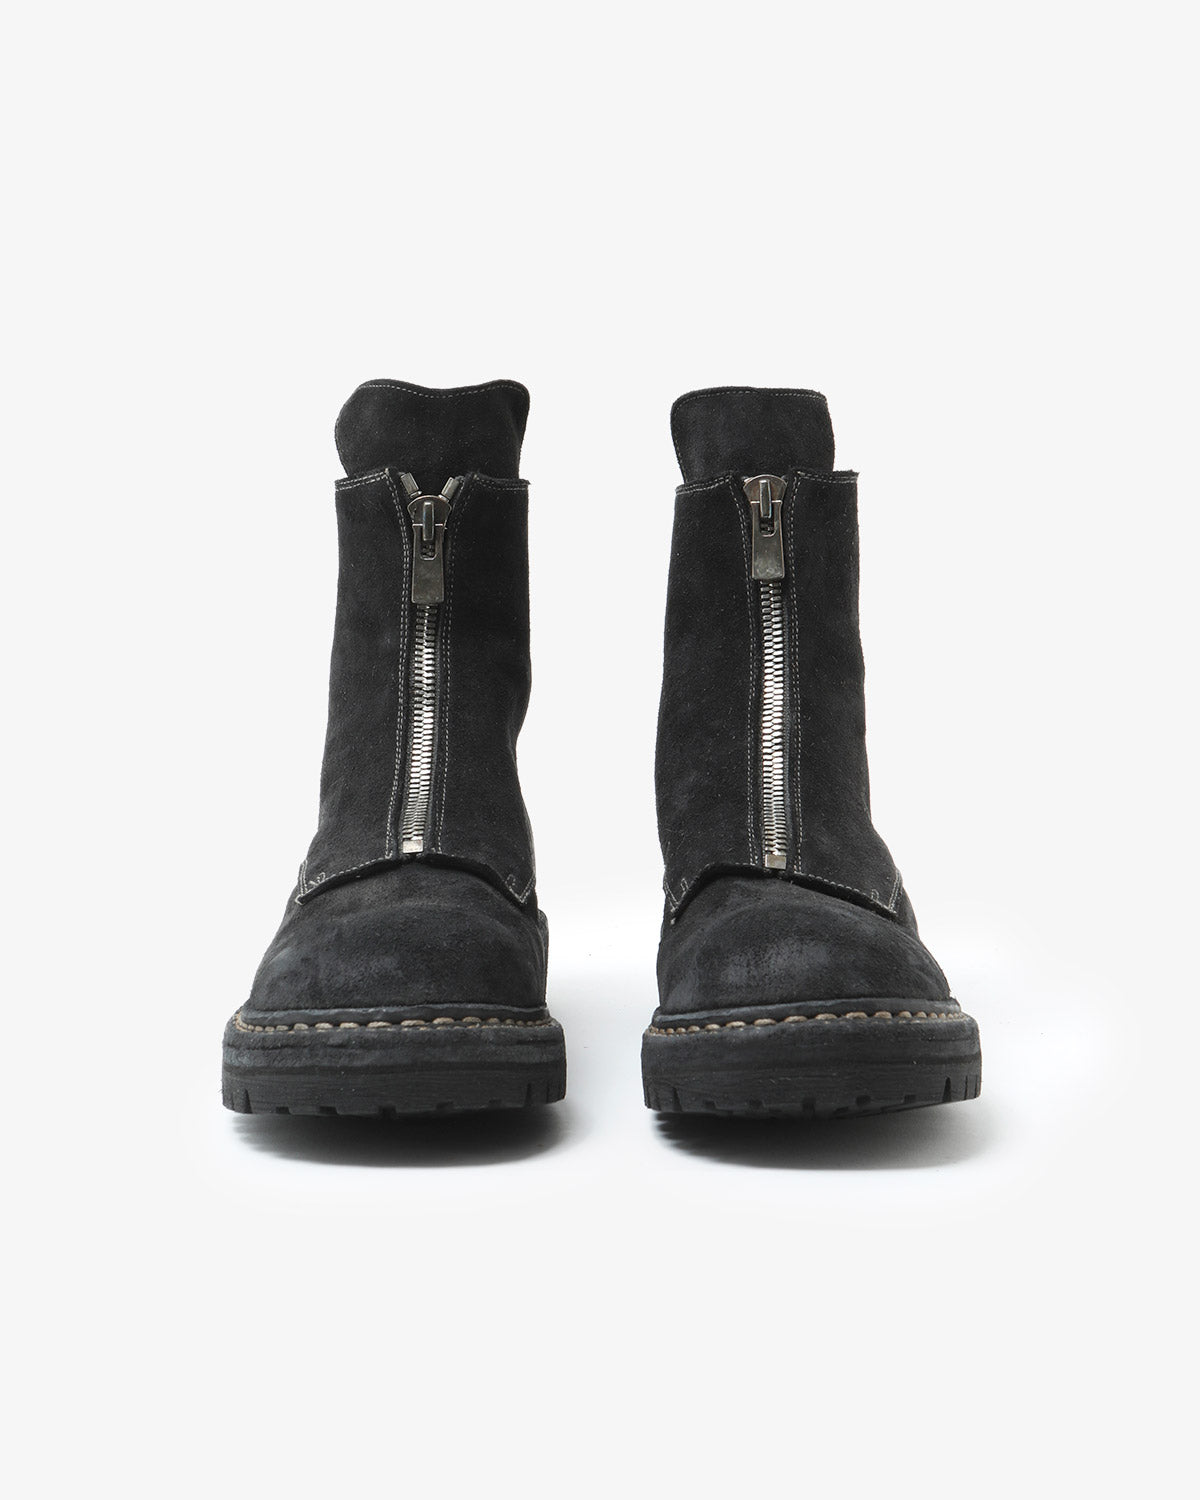 CENTER ZIP BOOTS “BIG DADDY" HORSE LEATHER by GUIDI